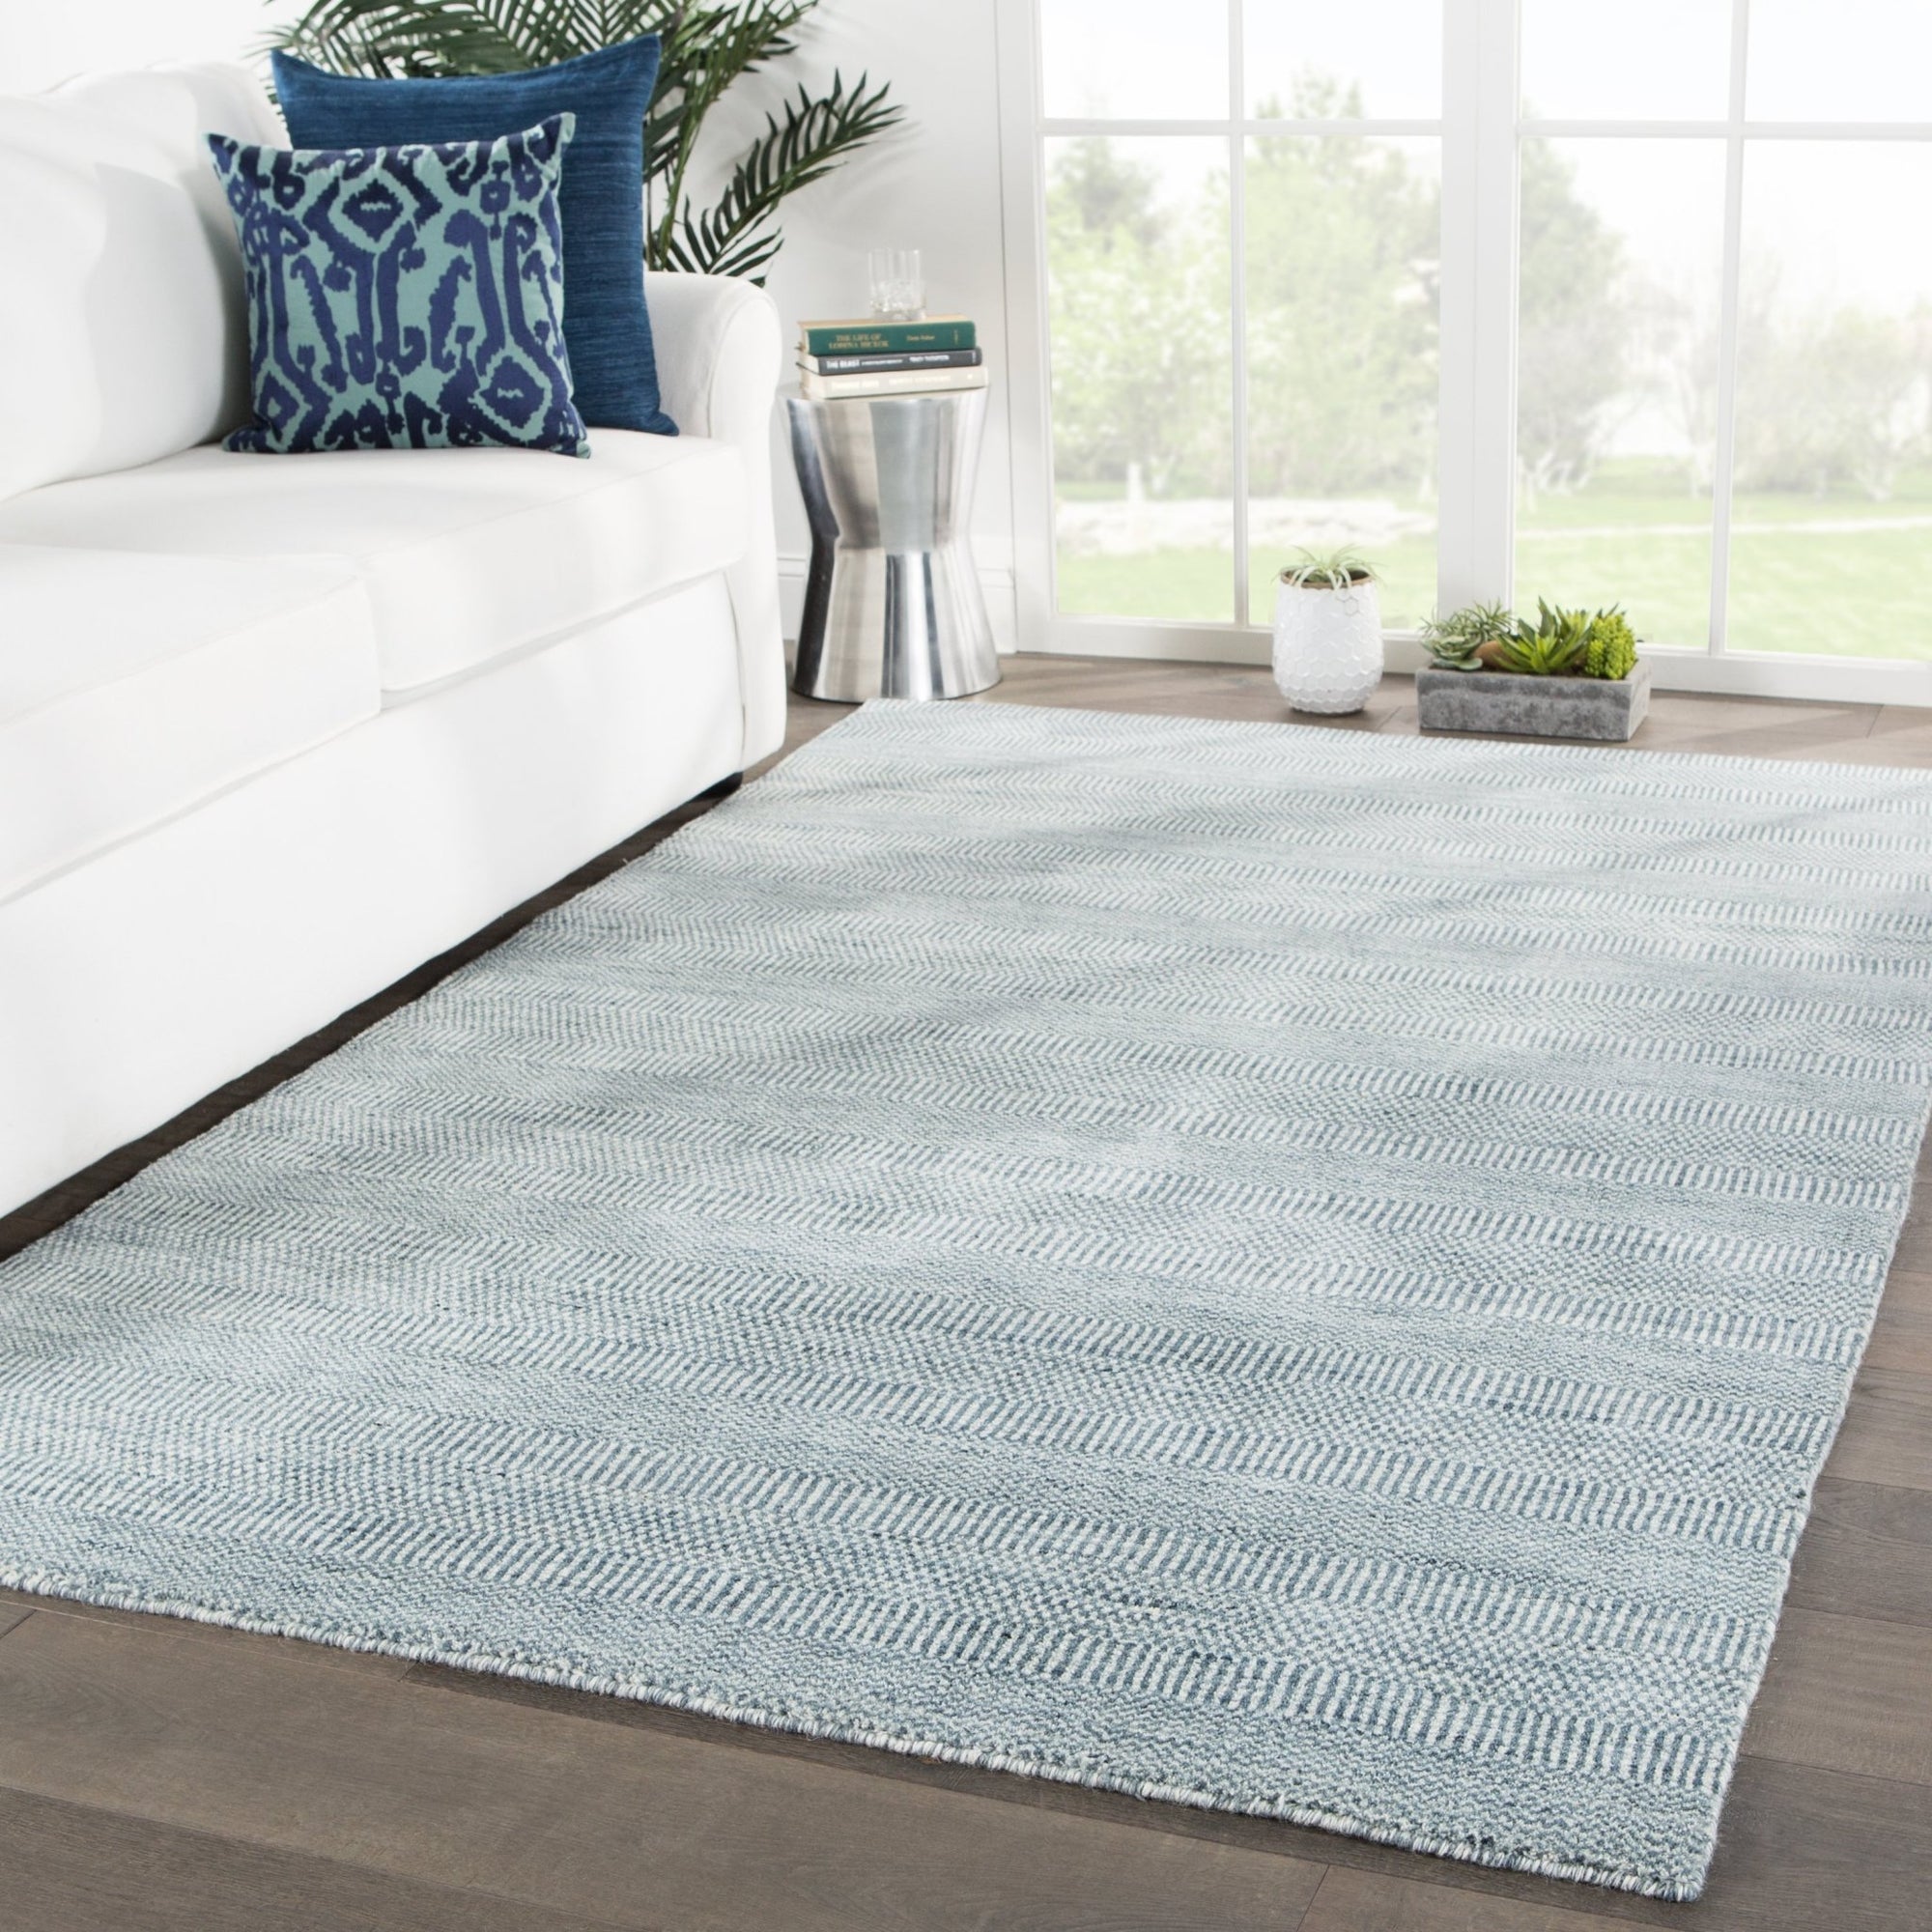 Trendier TEI03 Minuit Monument/Stormy Weather Rug - Rug & Home